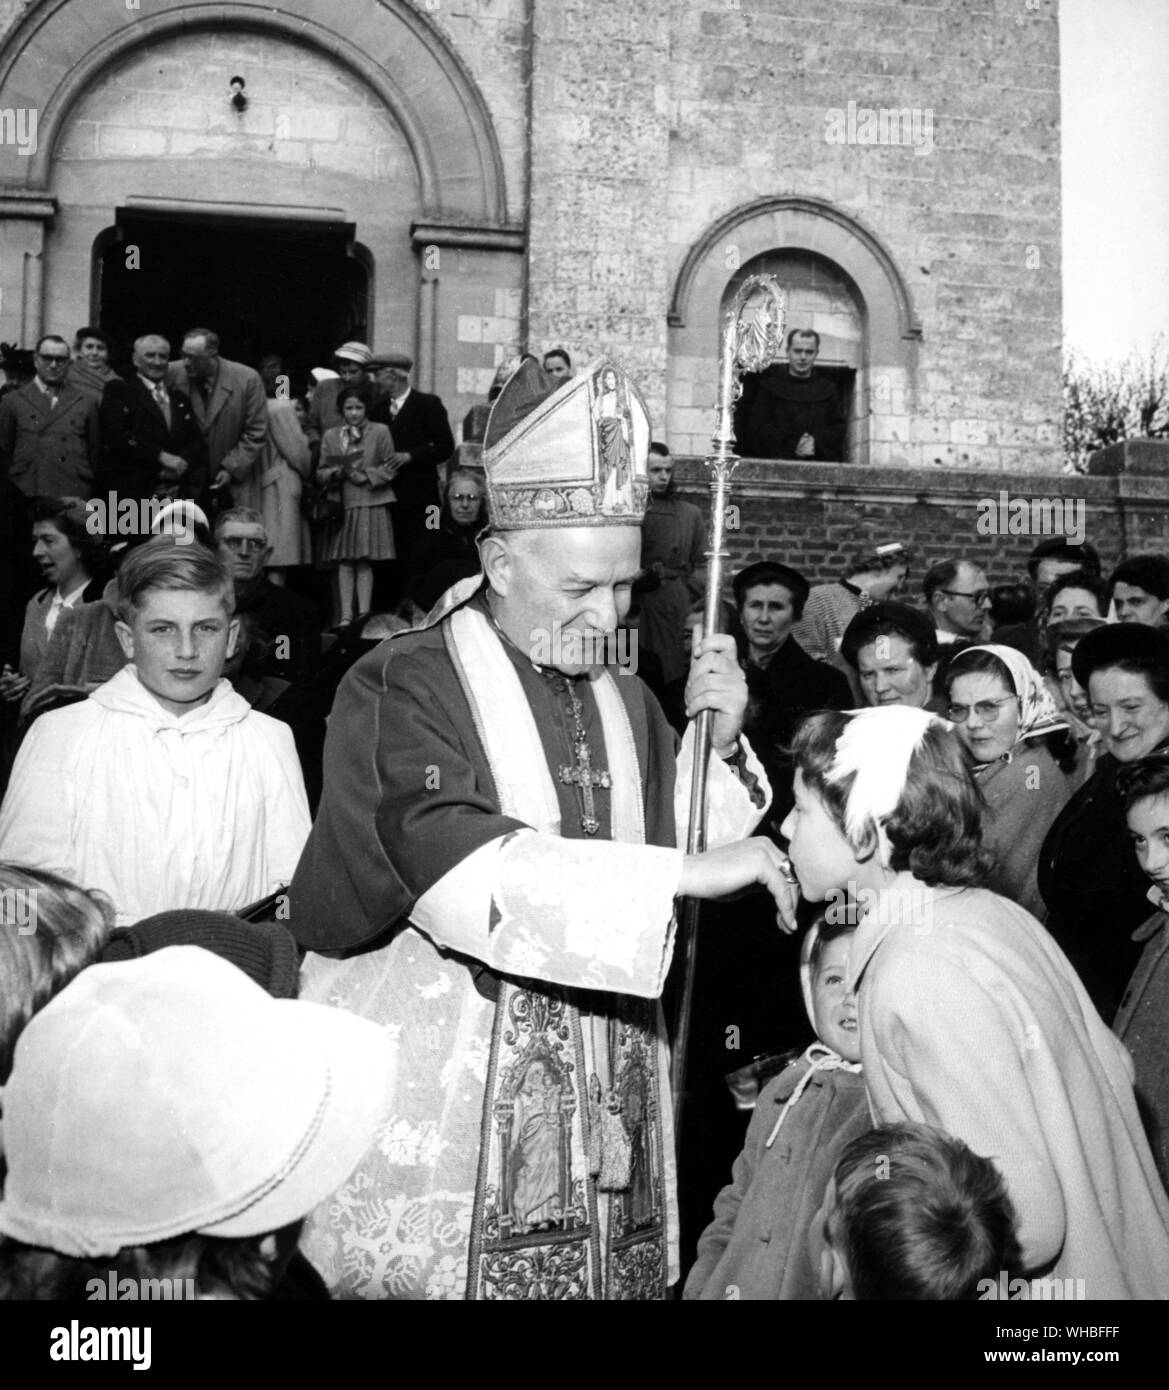 Roman Catholic bishop having his ring kissed by a young girl surrounded by a crowd of people outside church Stock Photo